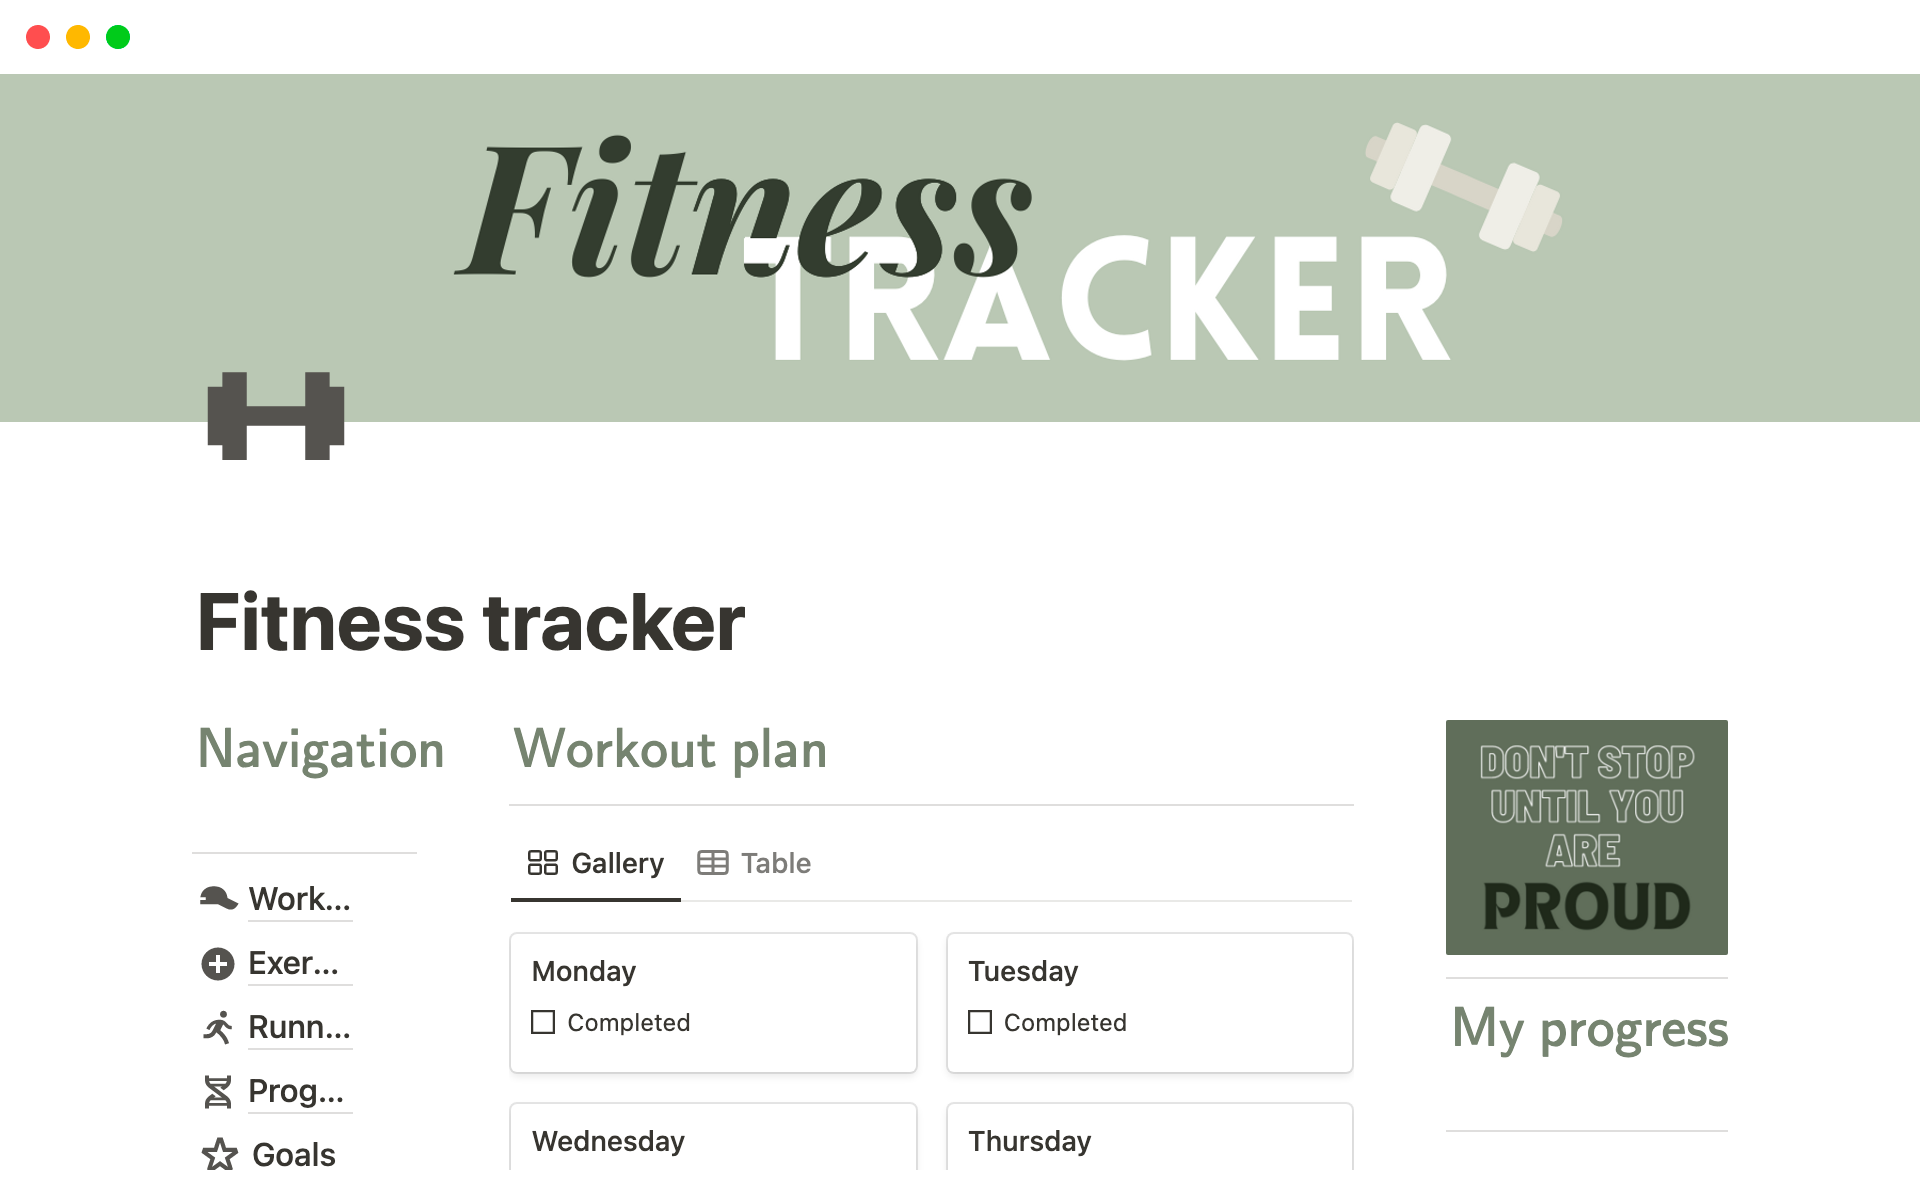 Keep track of anything related to fitness: workouts, exercises, running sessions, progress, goals and challenges.